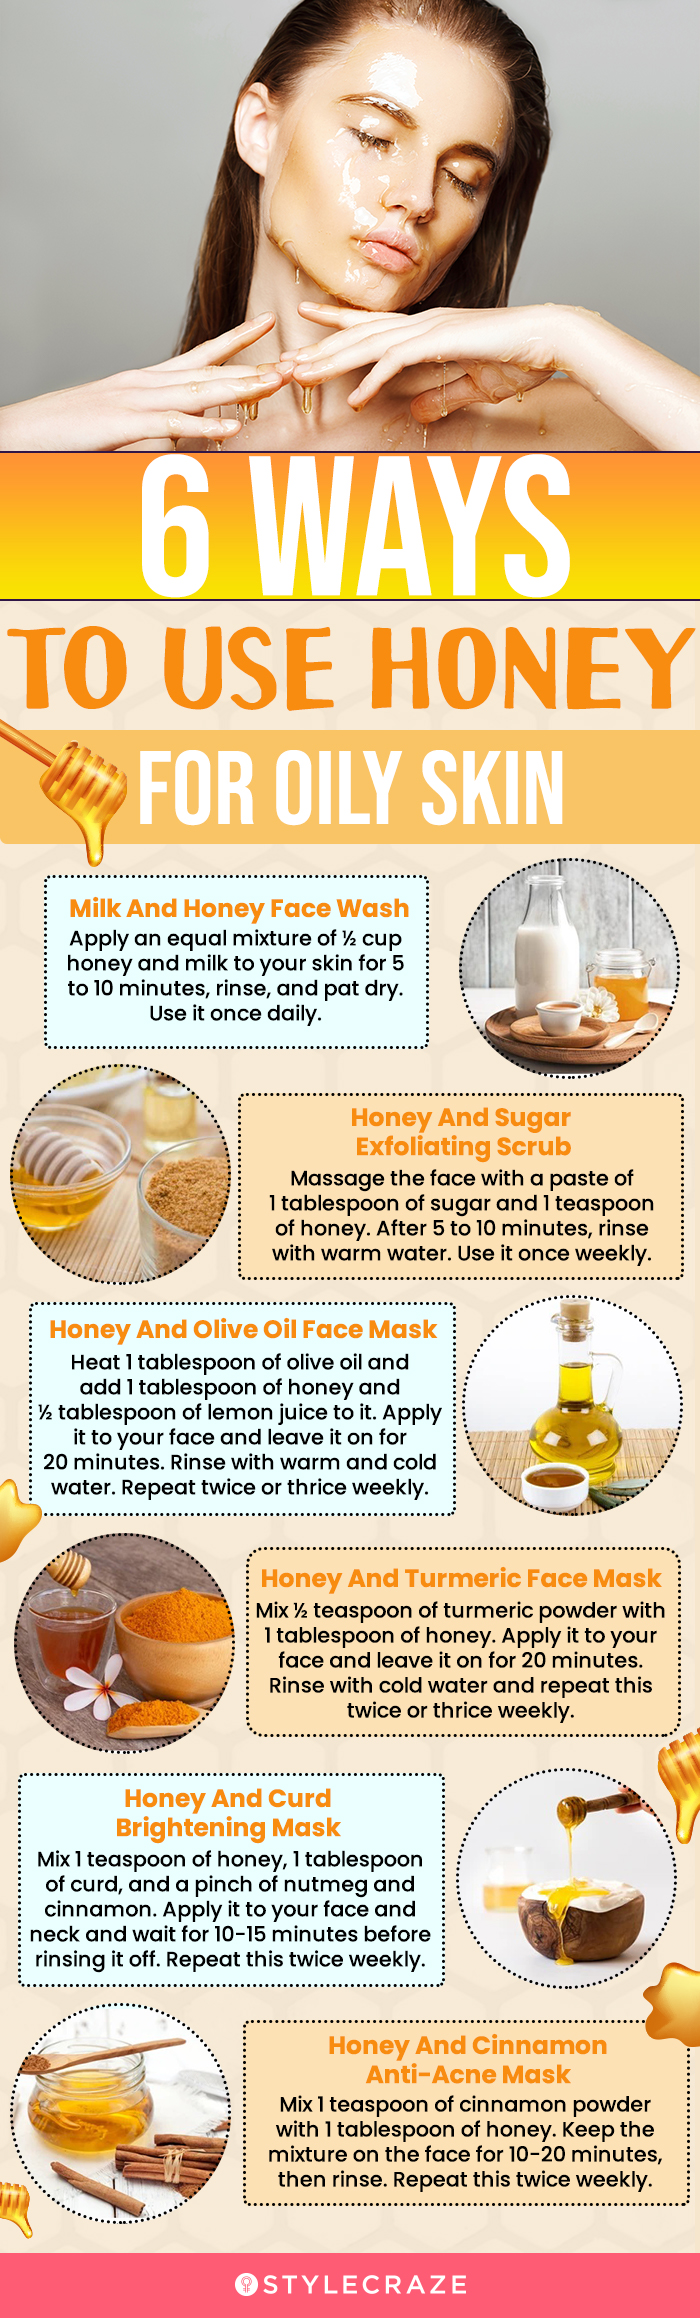 6 ways to use honey for oily skin (infographic)